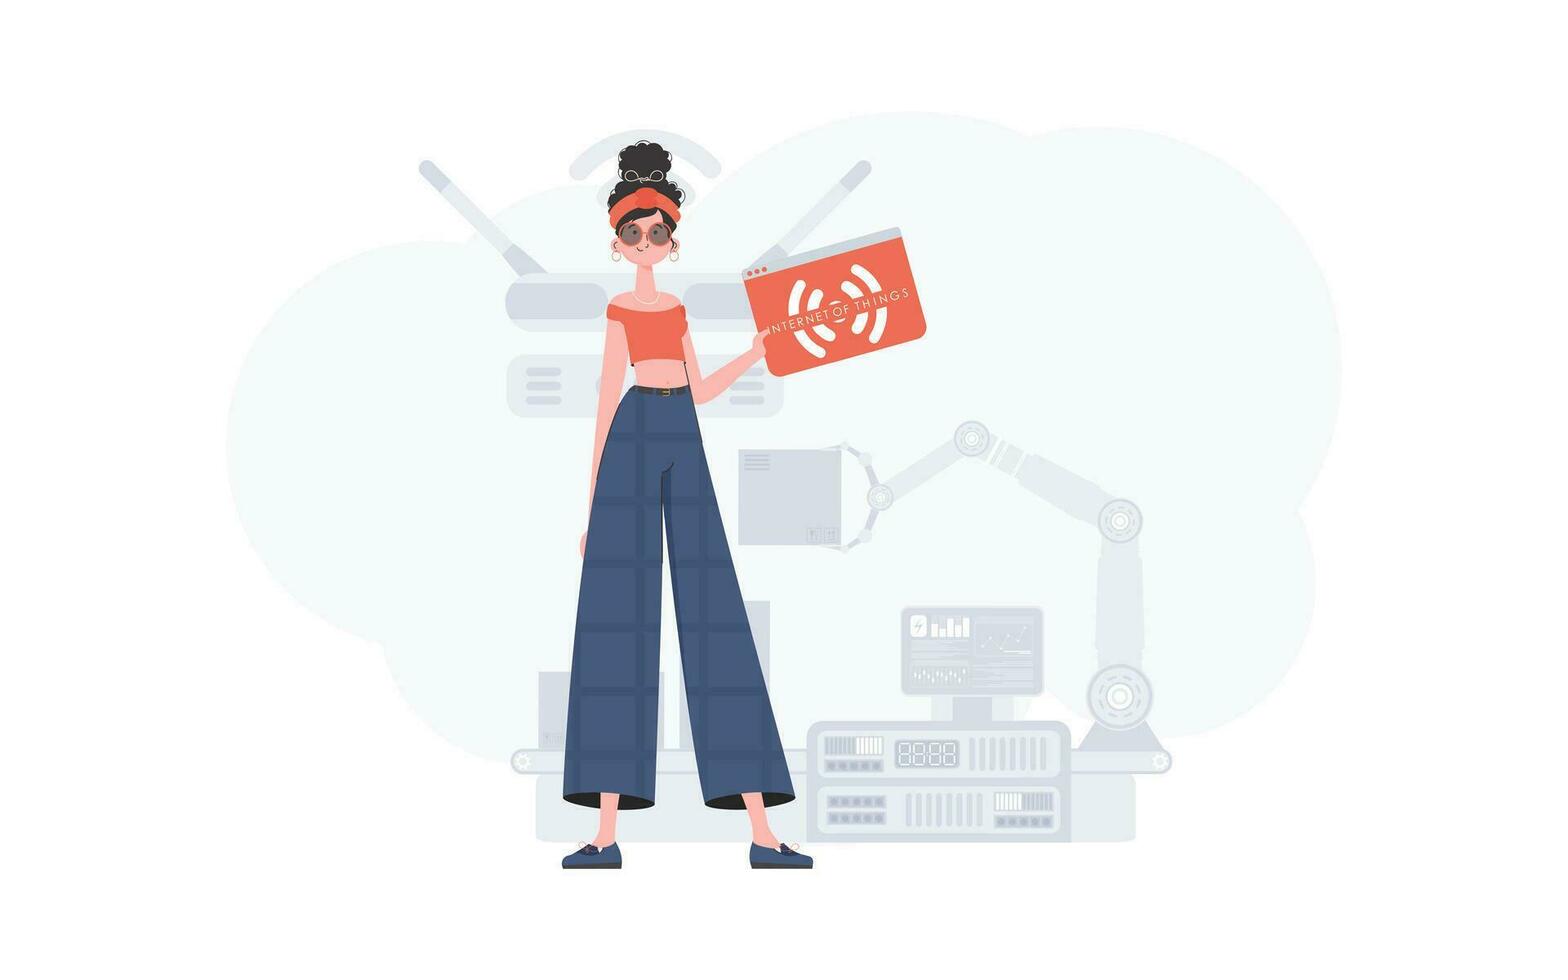 A woman is holding an internet thing icon in her hands. Internet of things concept. Good for presentations and websites. Vector illustration in trendy flat style.